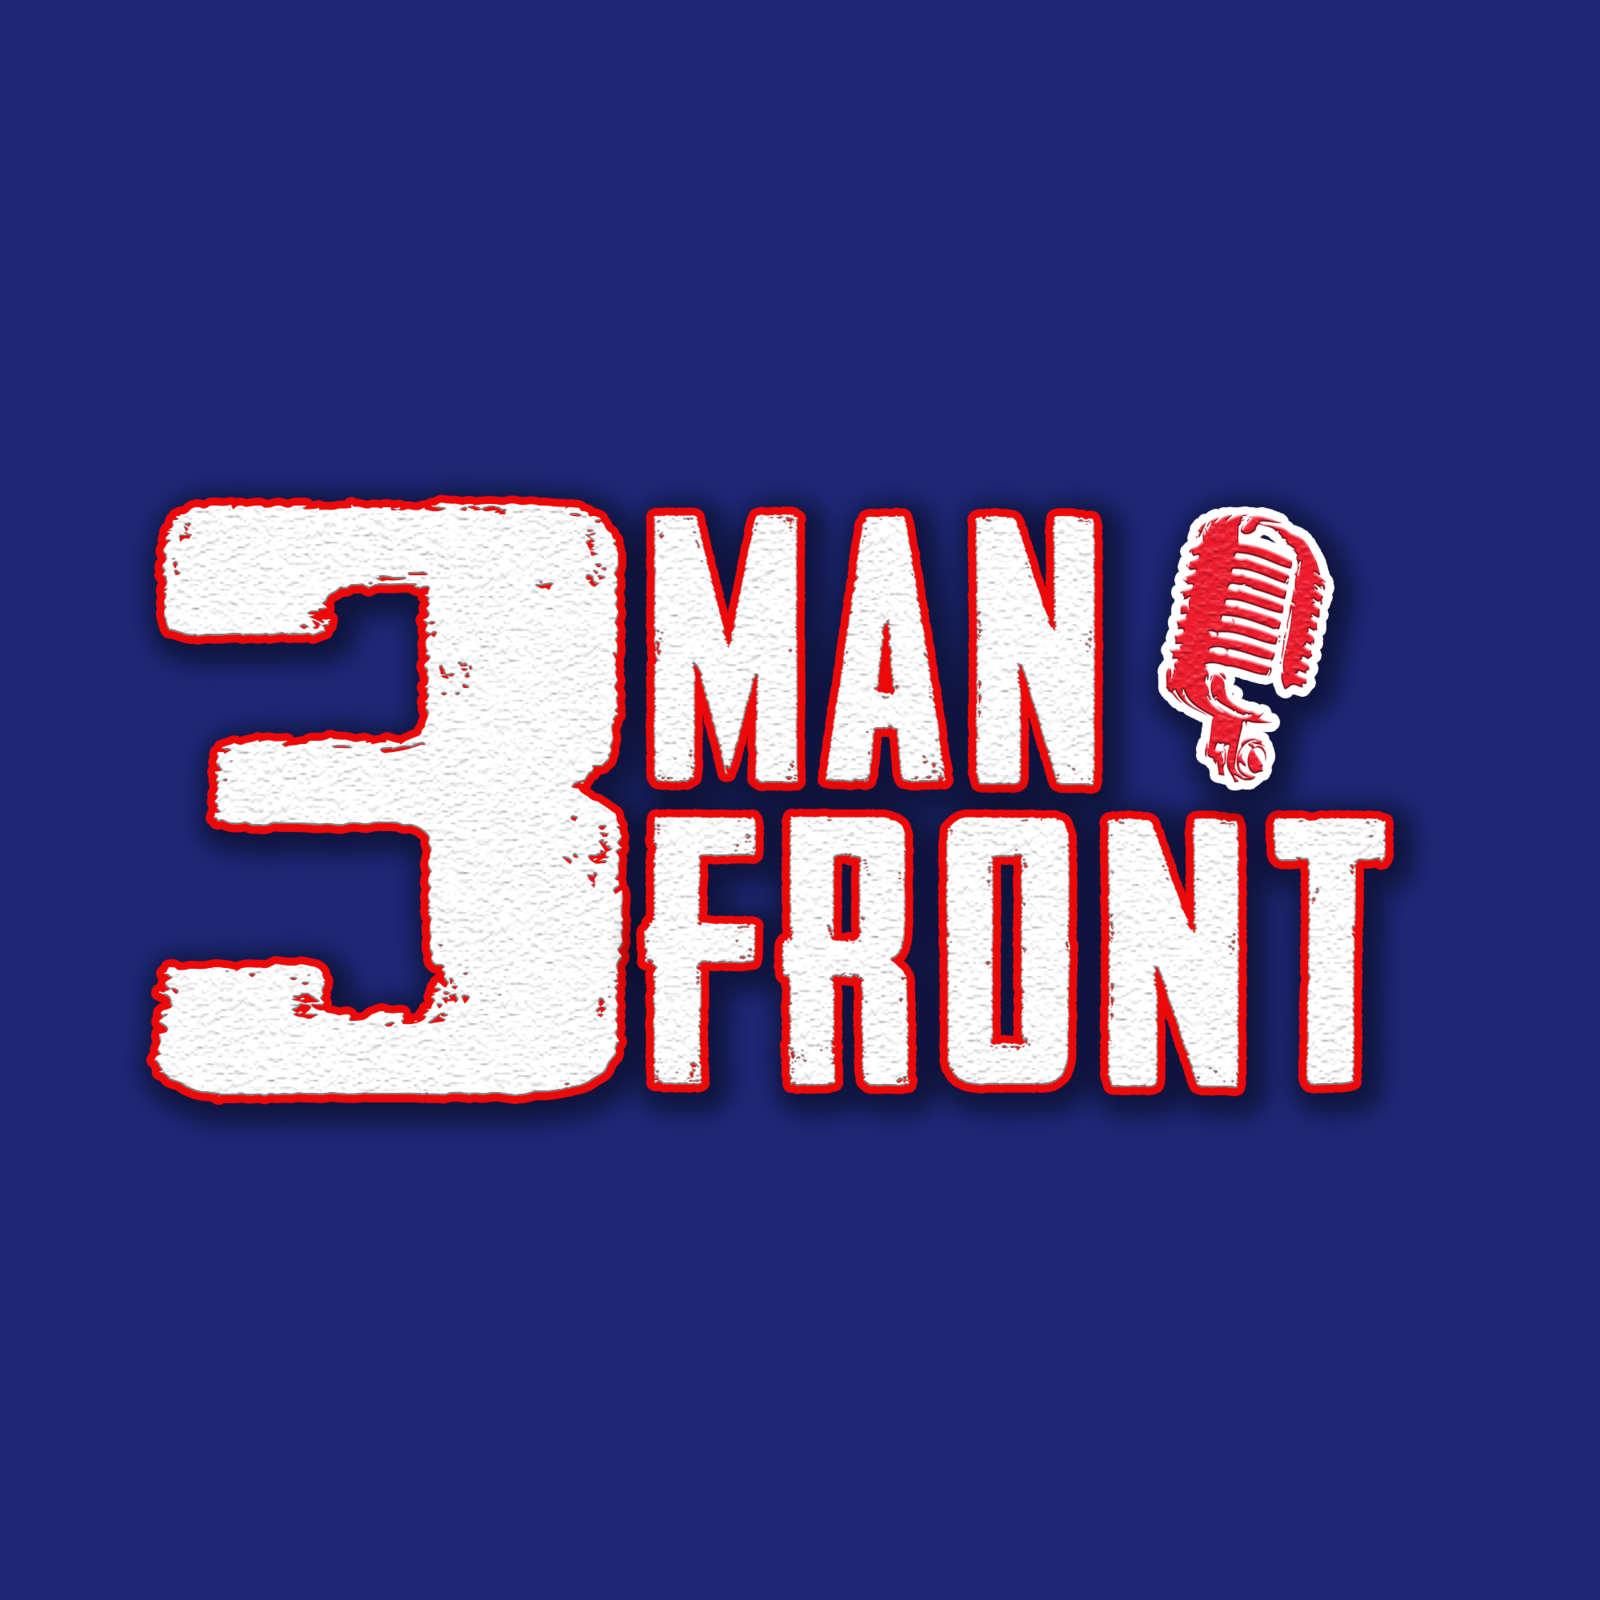 3 Man Front: Dr. David Ridpath breaks down the NCAA settlement & finances in college athletics